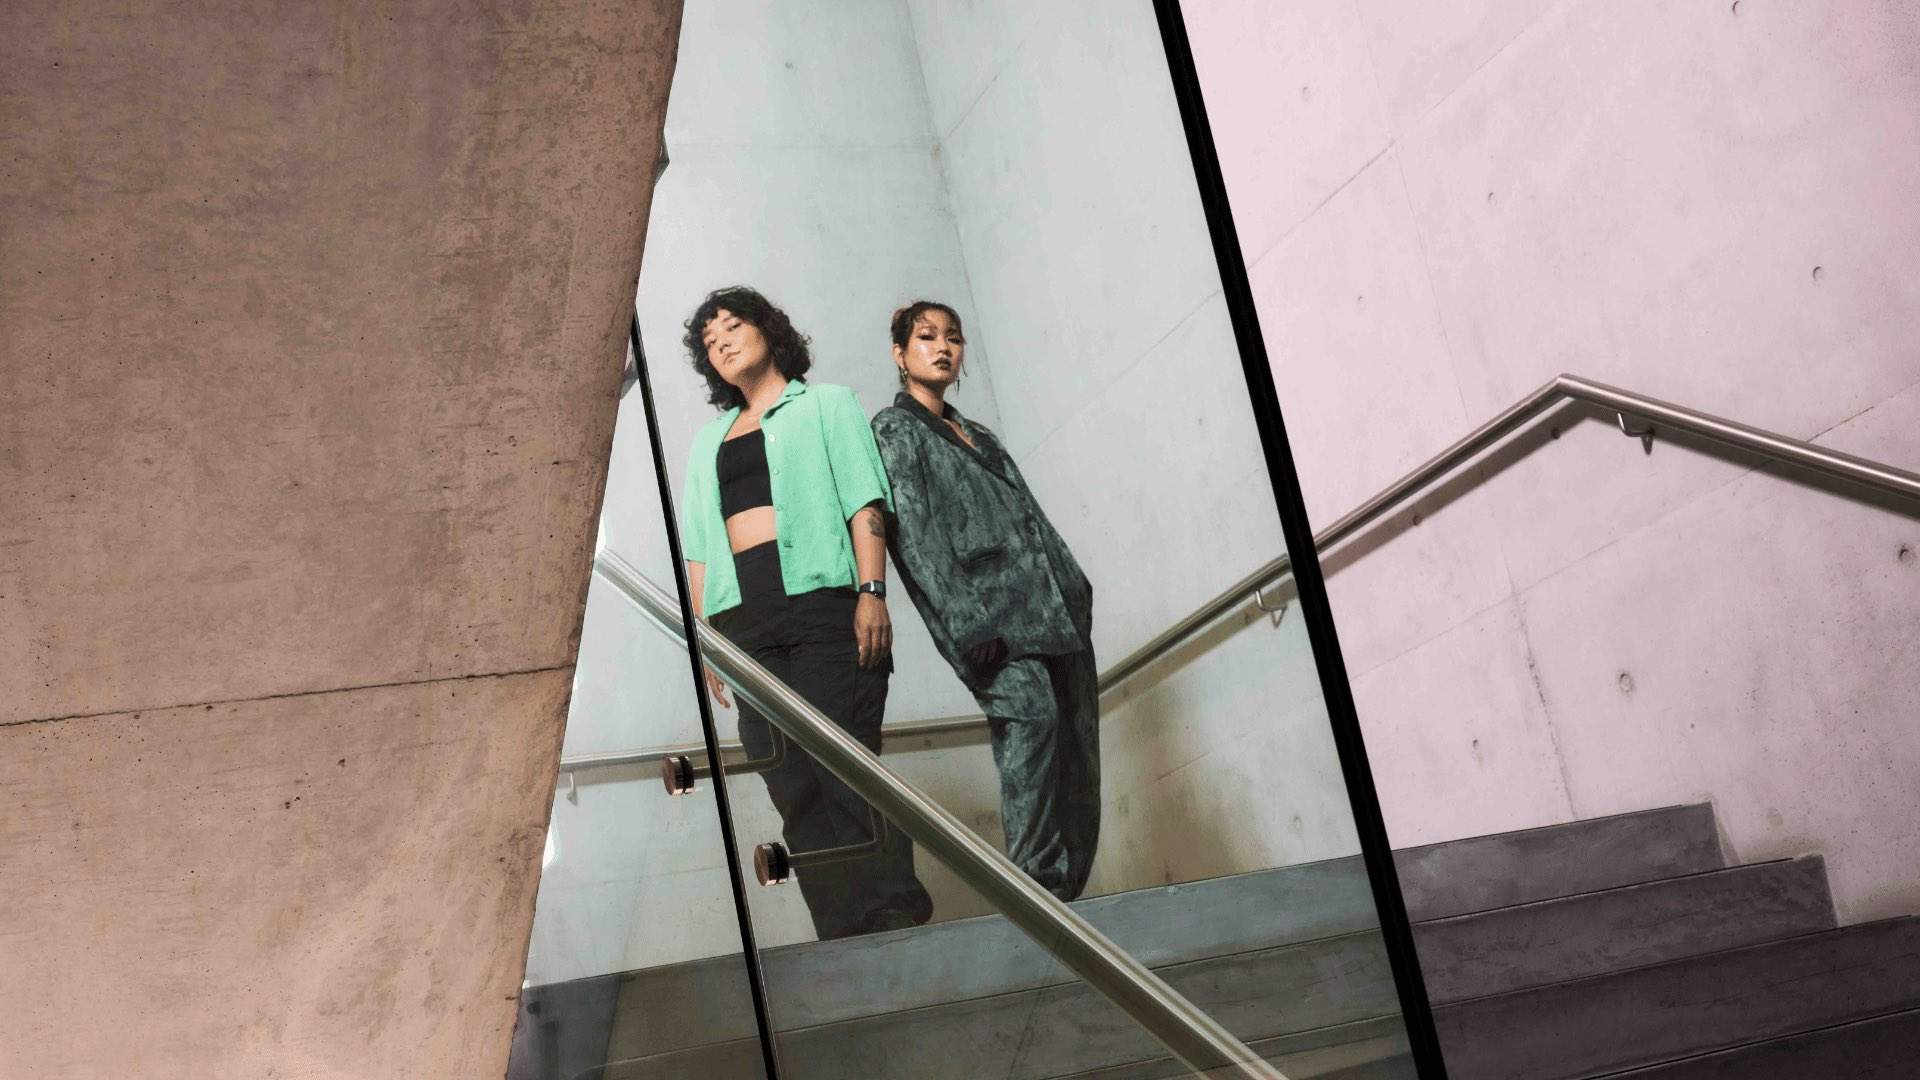 Two artists on the stairs of the Museum of Contemporary Art.